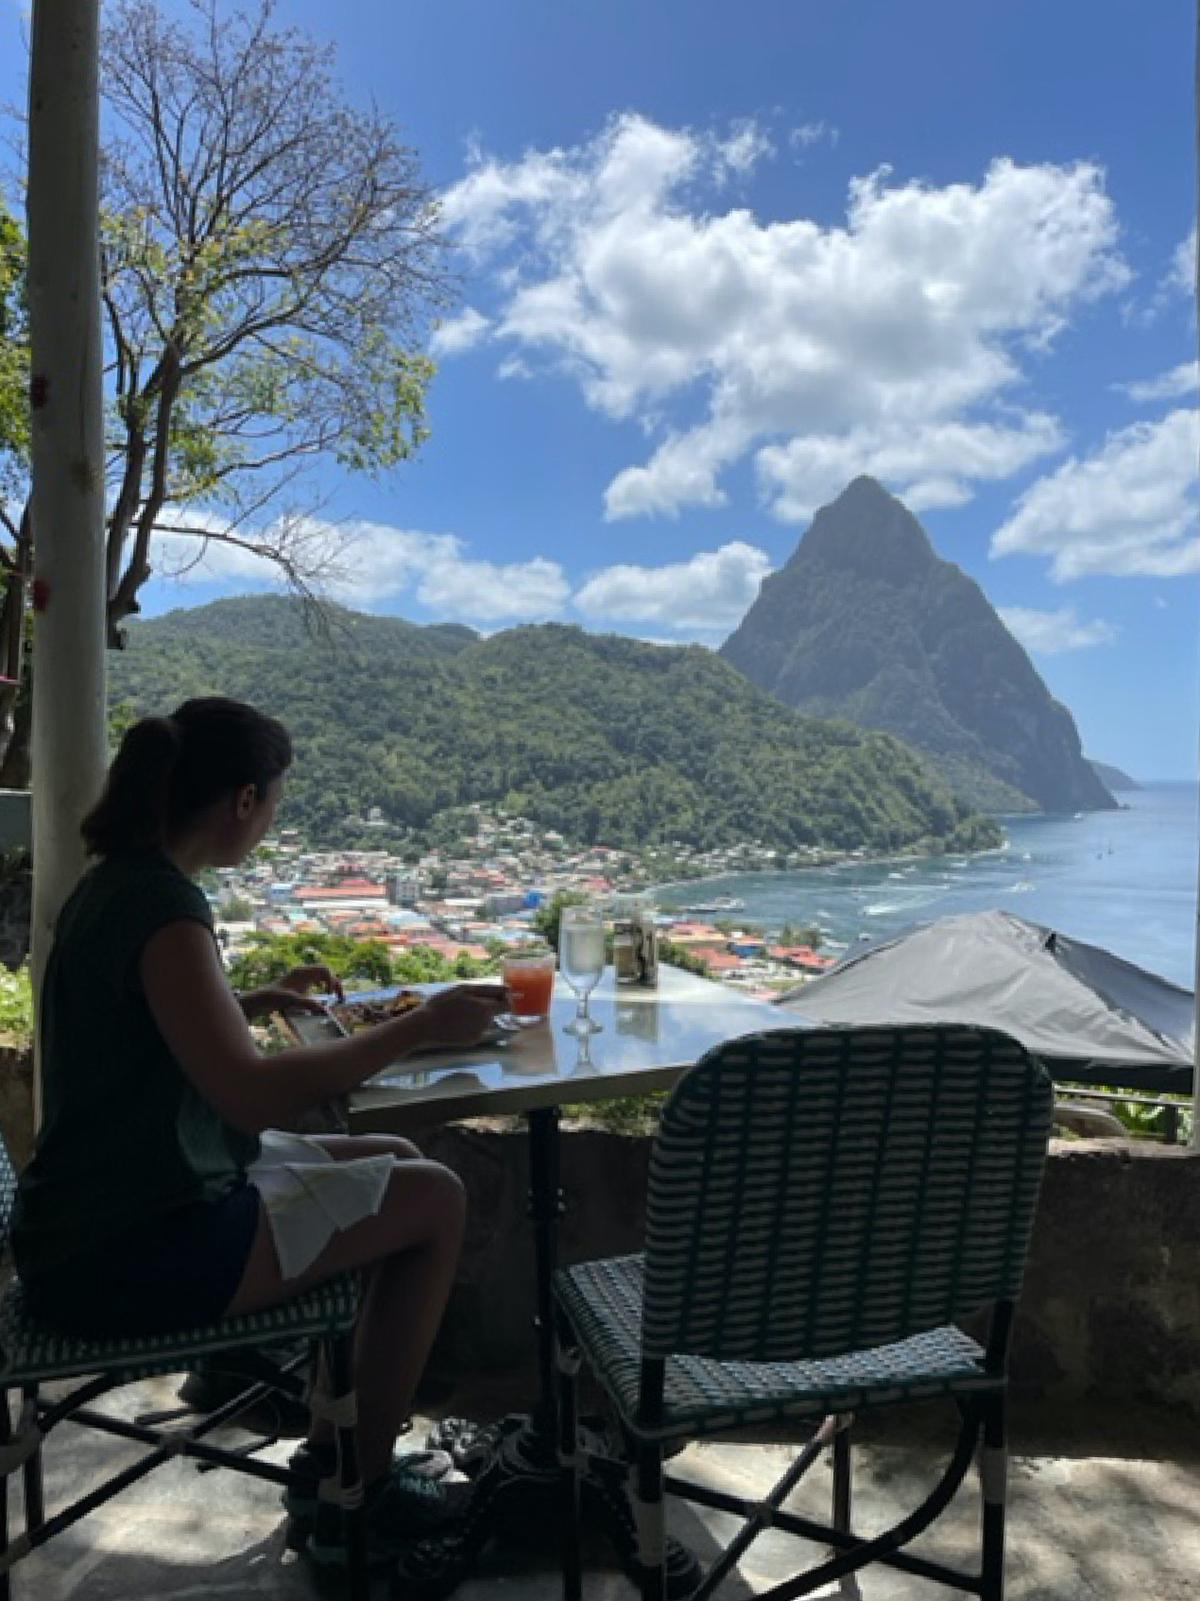 A guest enjoys open-air dining on local Creole cuisine at the Green Fig Resort with Petit Piton in the distance beyond Soufriere, St. Lucia. (Photo courtesy of Lesley Frederikson)